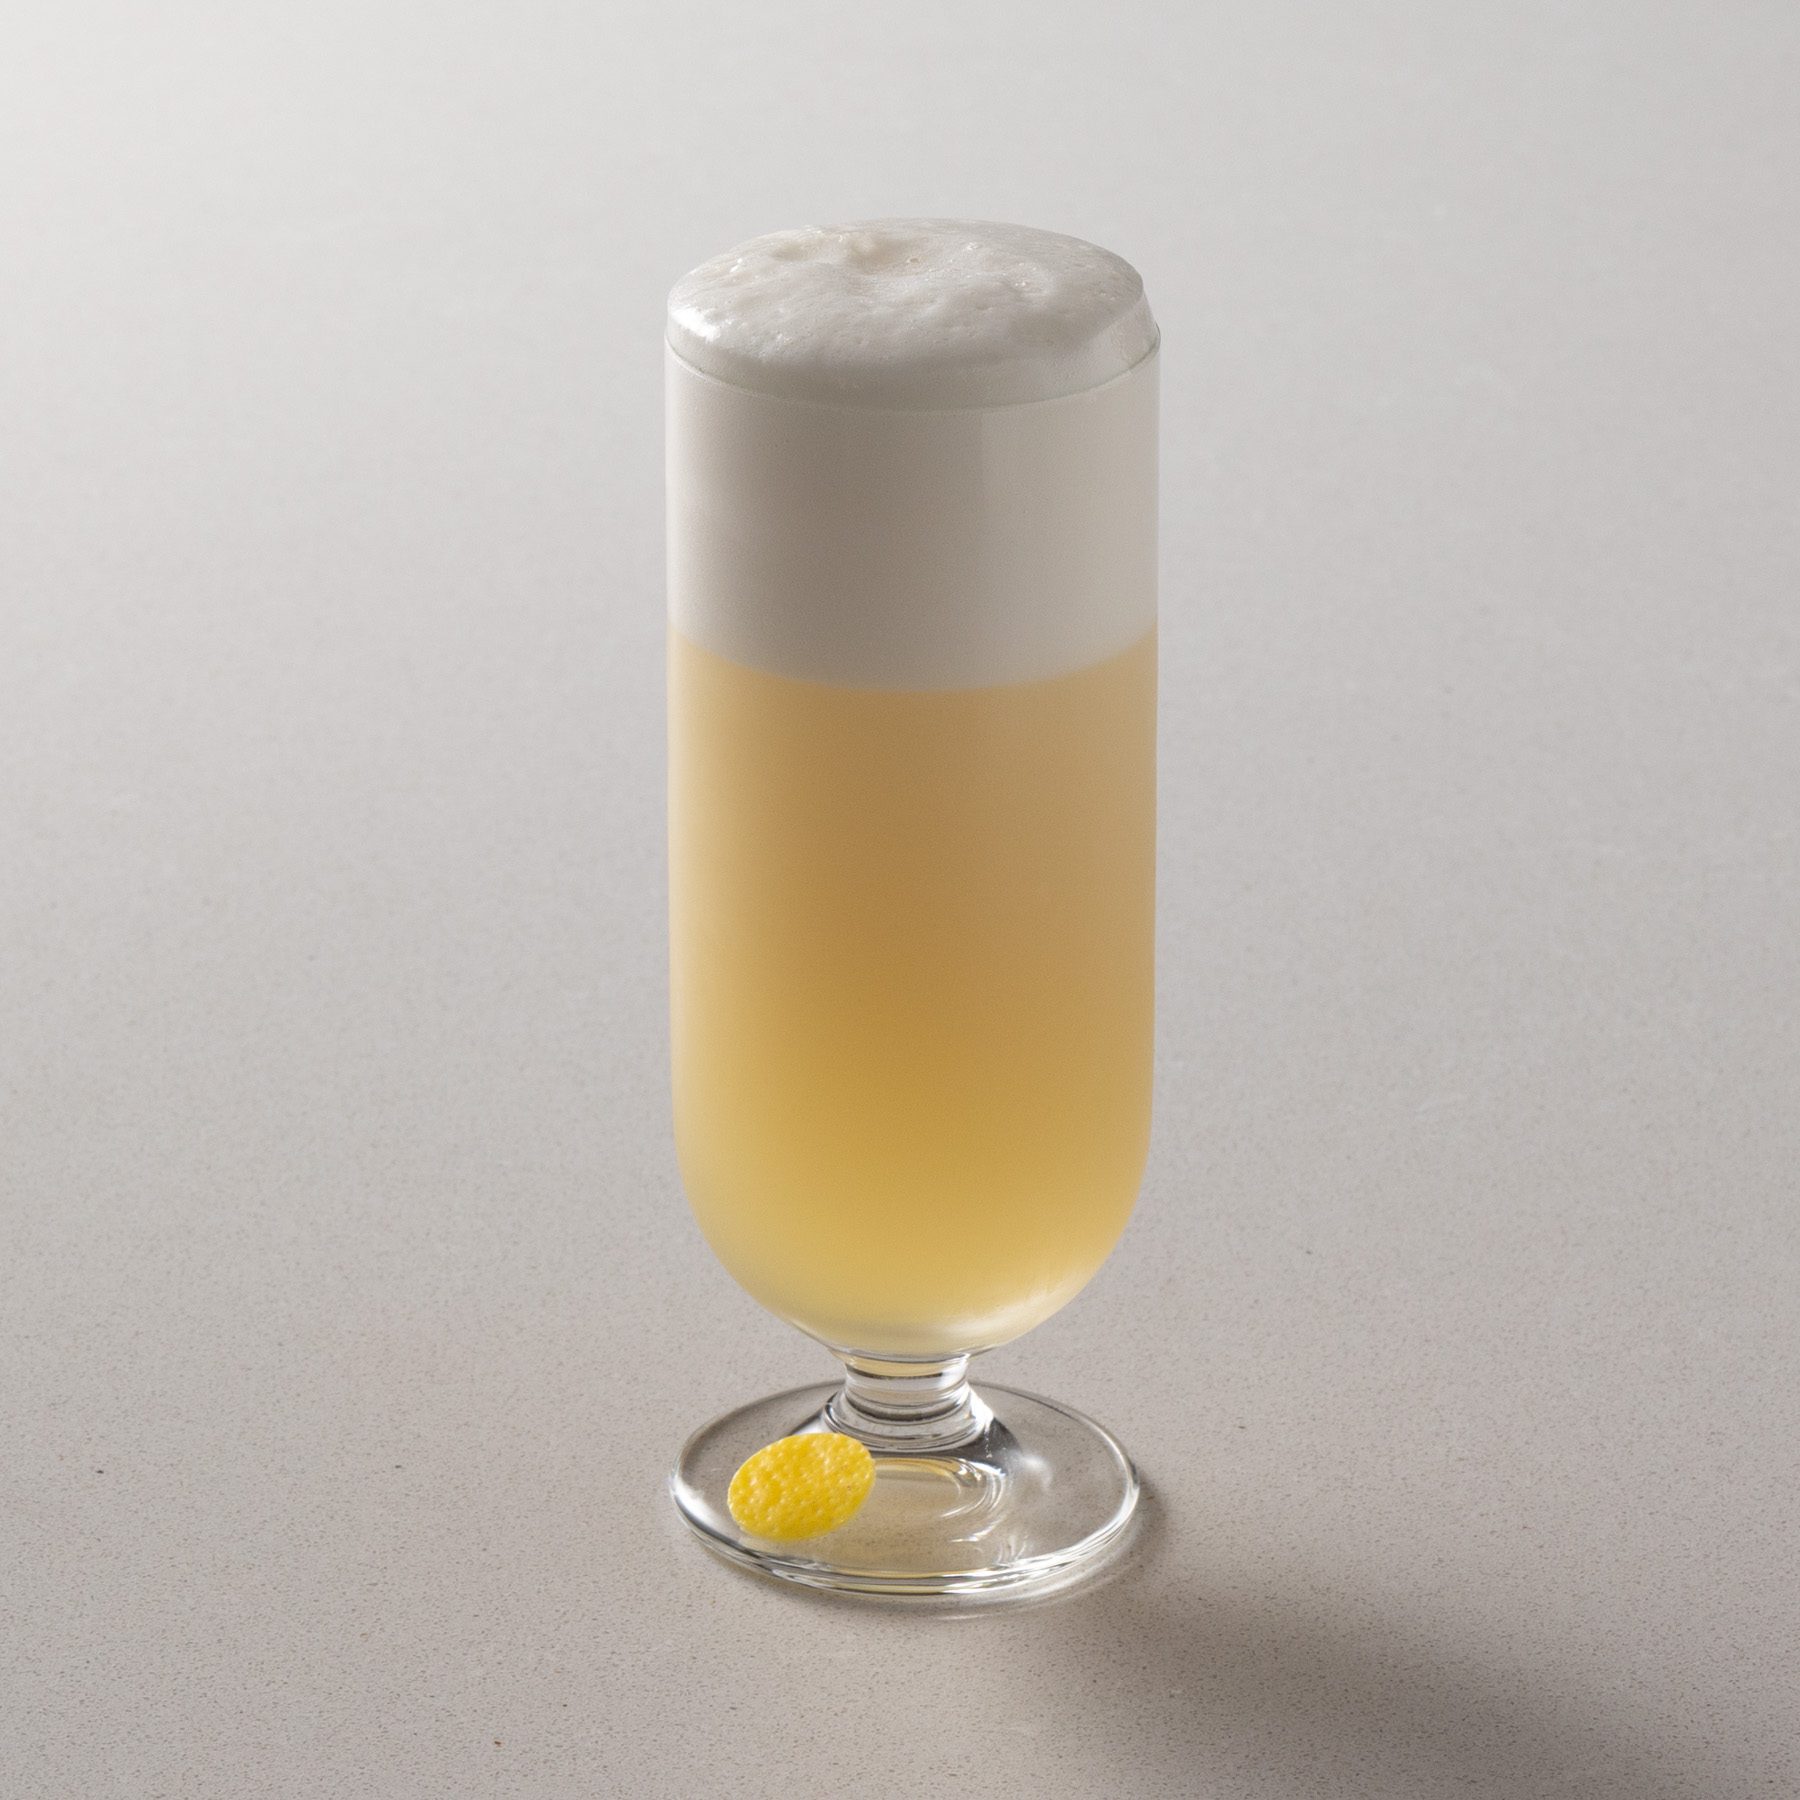 Morning Glory Fizz cocktail